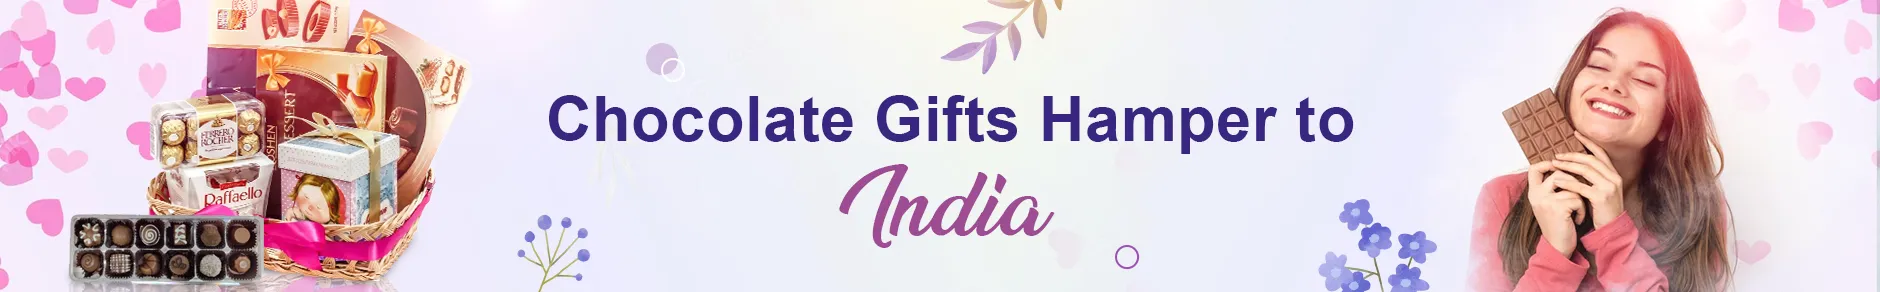 Chocolates - Send Chocolate Gifts Online to India